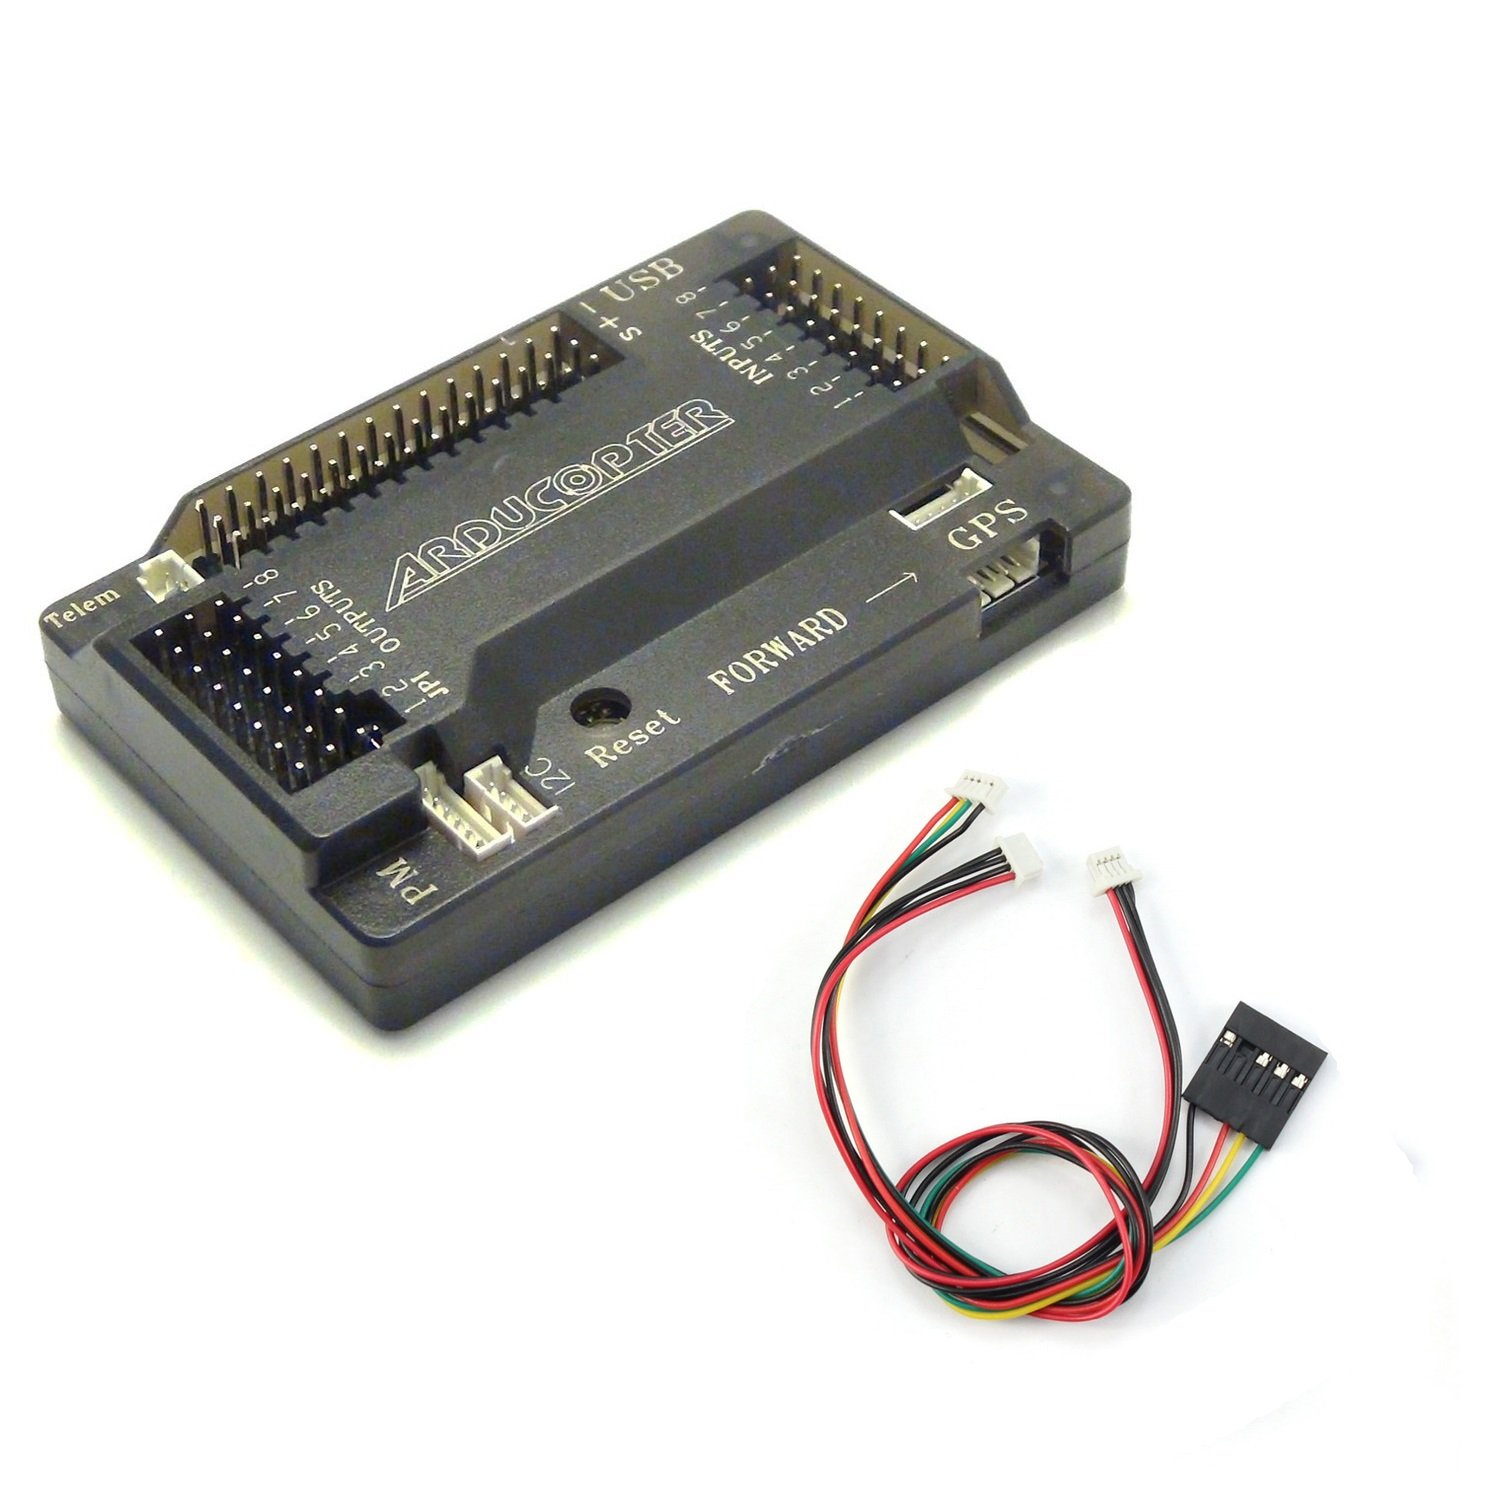 Apm 2.8 Flight Controller With Built-In Compass